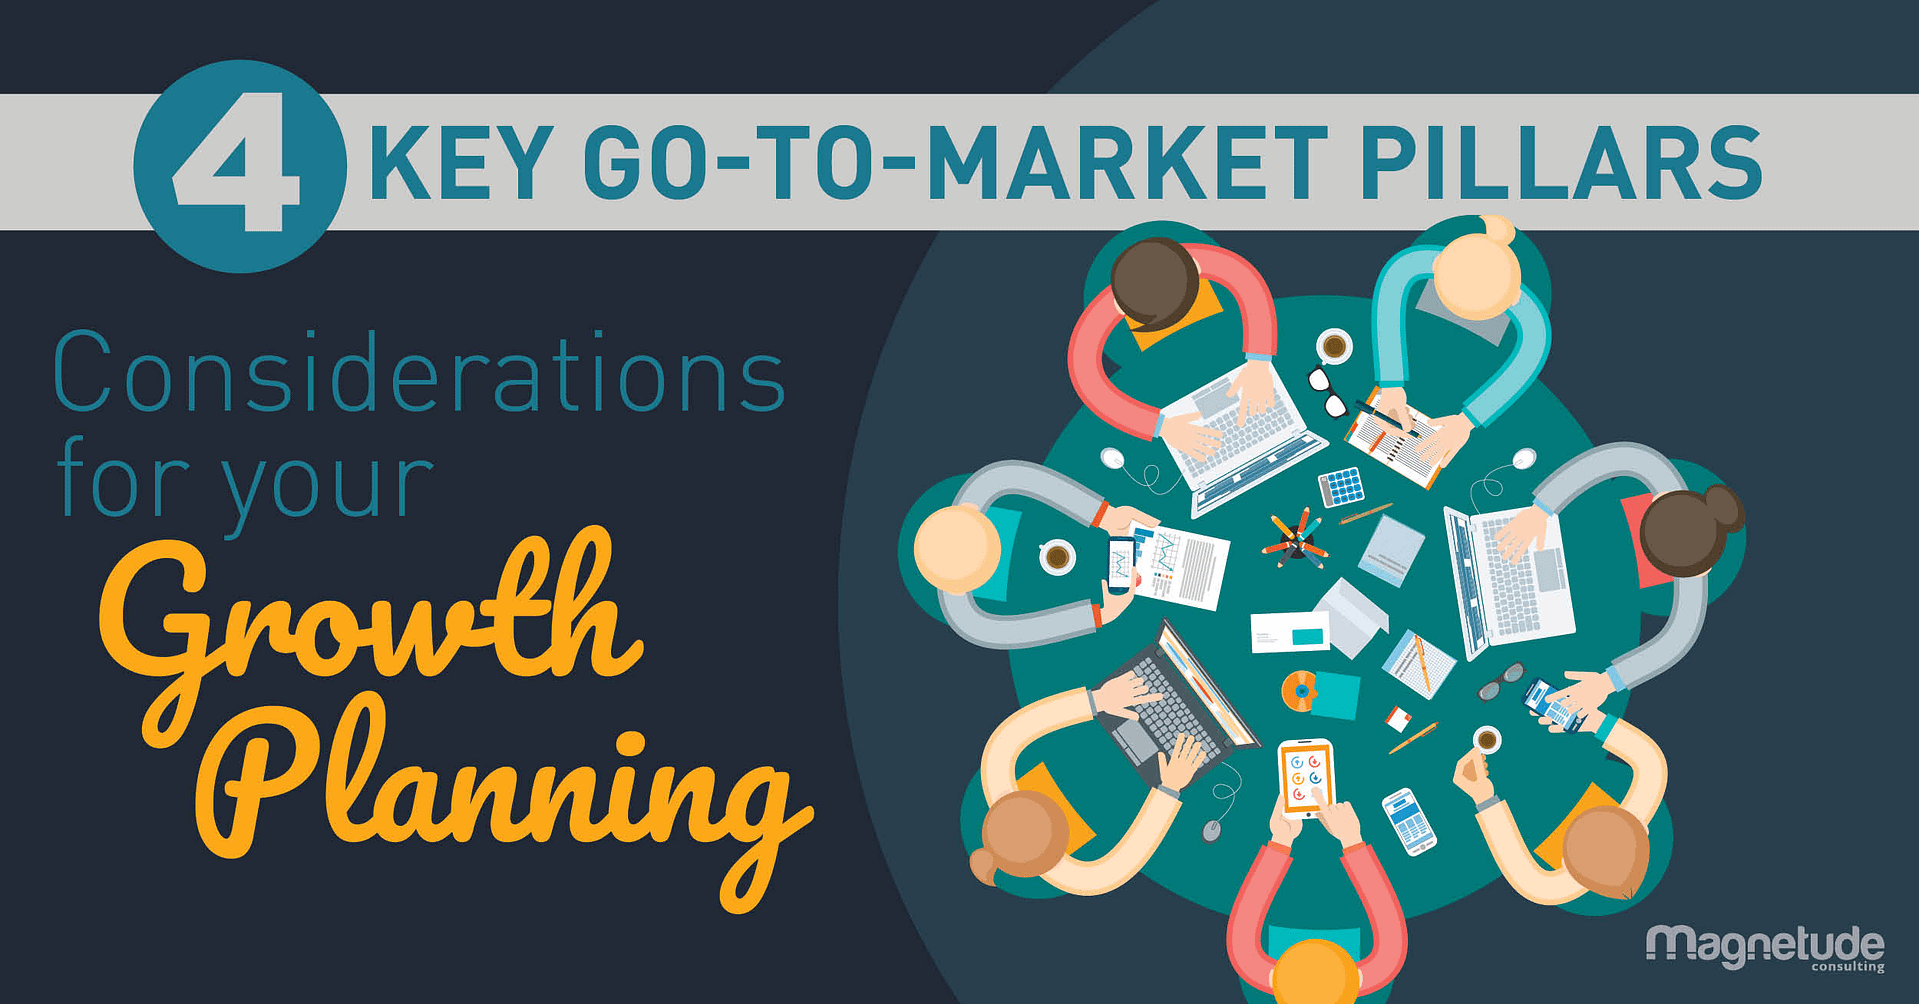 4 Key Go-to-Market Pillars: Considerations for your Growth Planning blog post